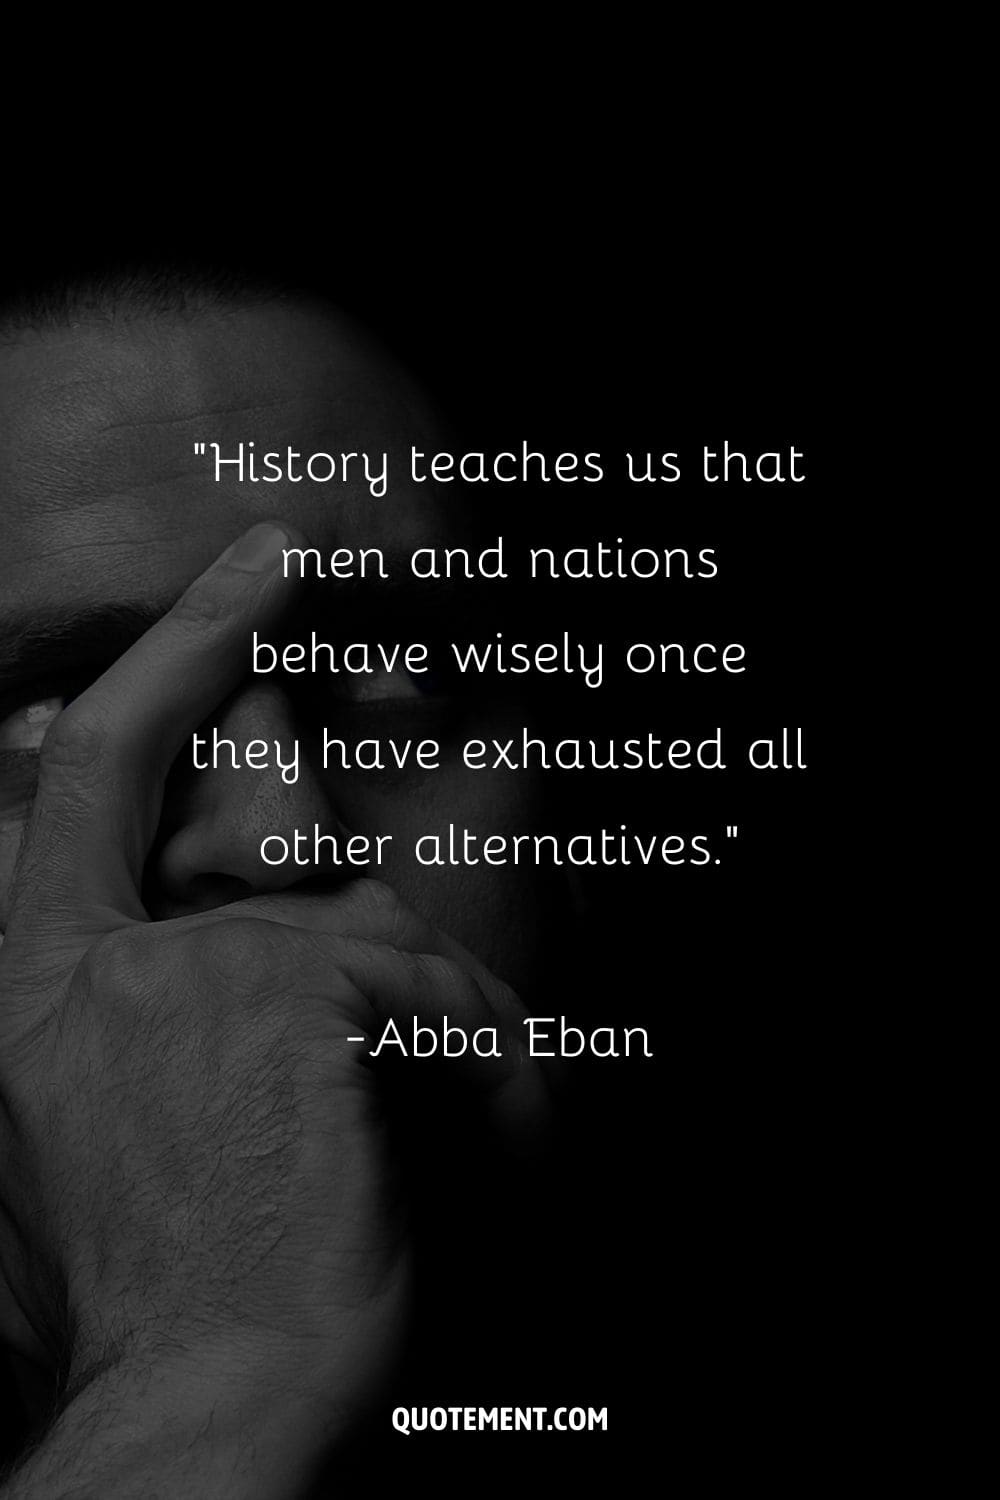 “History teaches us that men and nations behave wisely once they have exhausted all other alternatives.” ― Abba Eban